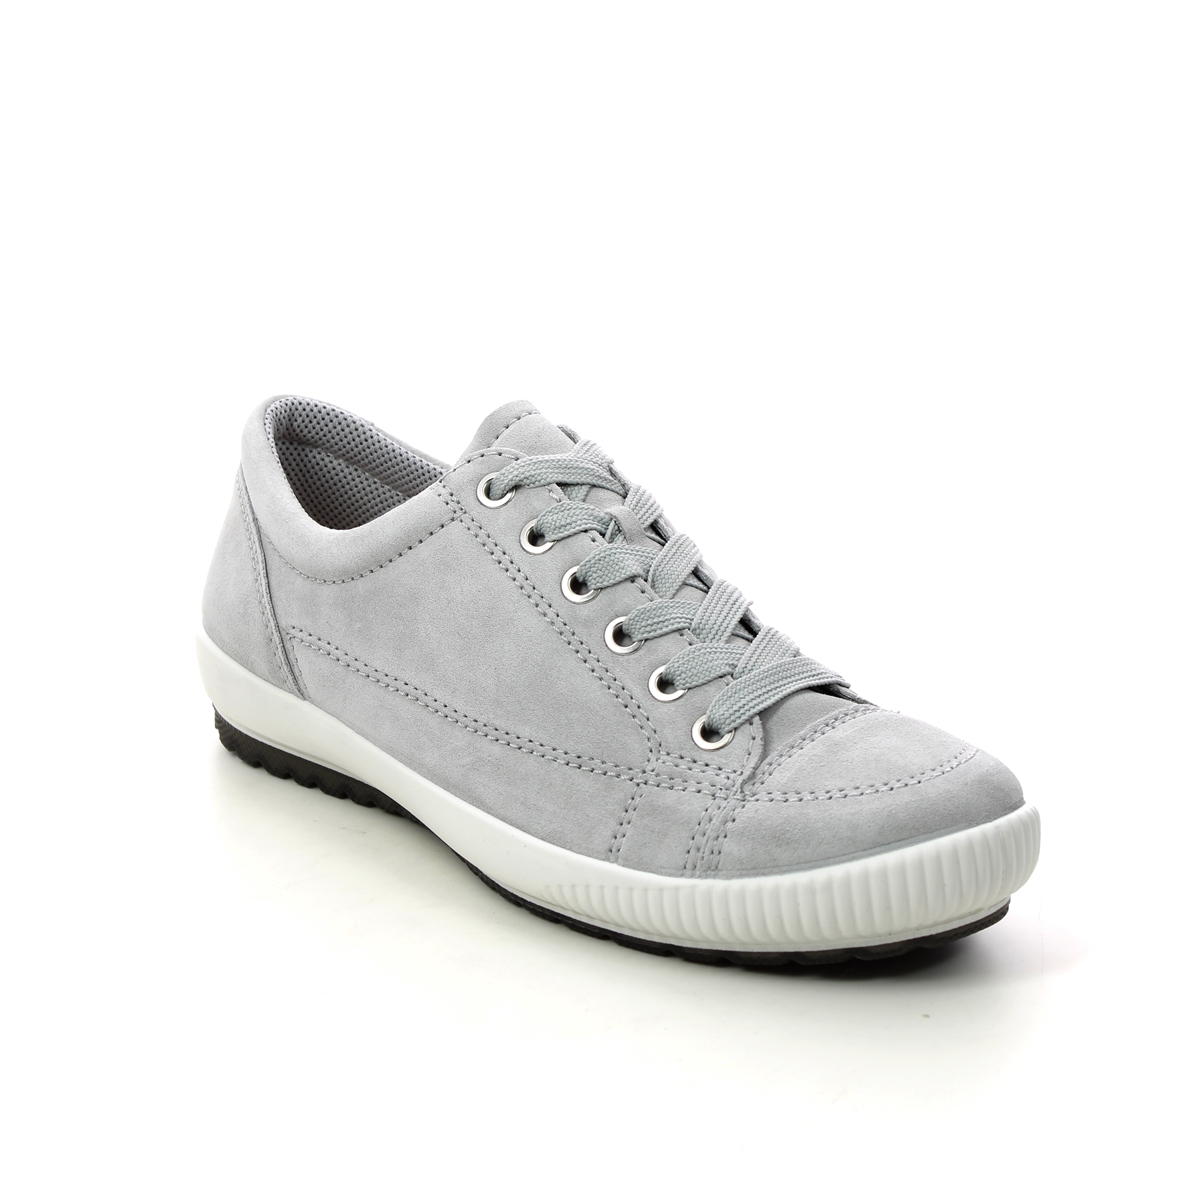 Legero Tanaro Stitch Light Grey Suede Womens Lacing Shoes 00820-25 In Size 6.5 In Plain Light Grey Suede